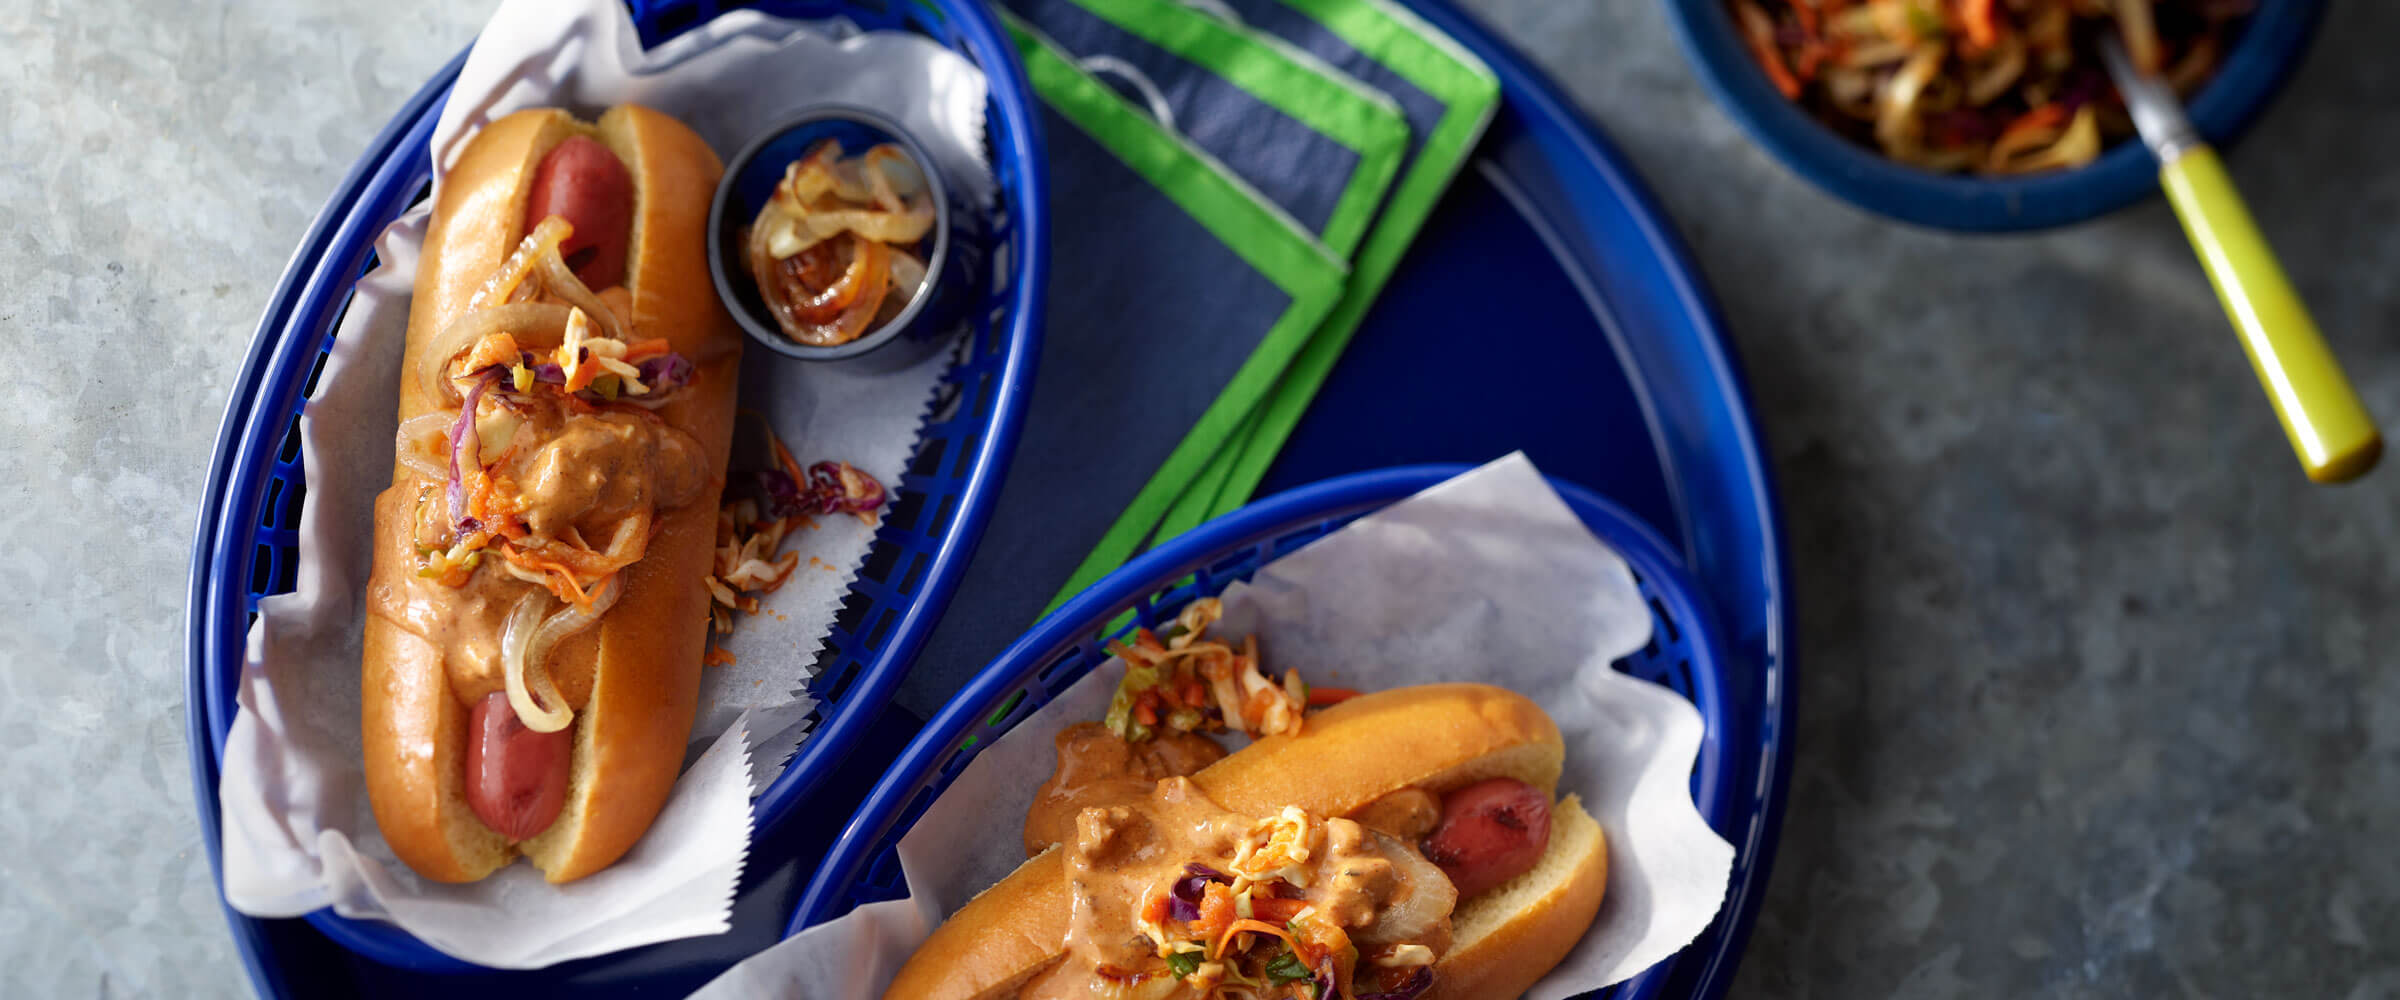 Seattle Chili Dog topped with onions and and sauce in blue baskets